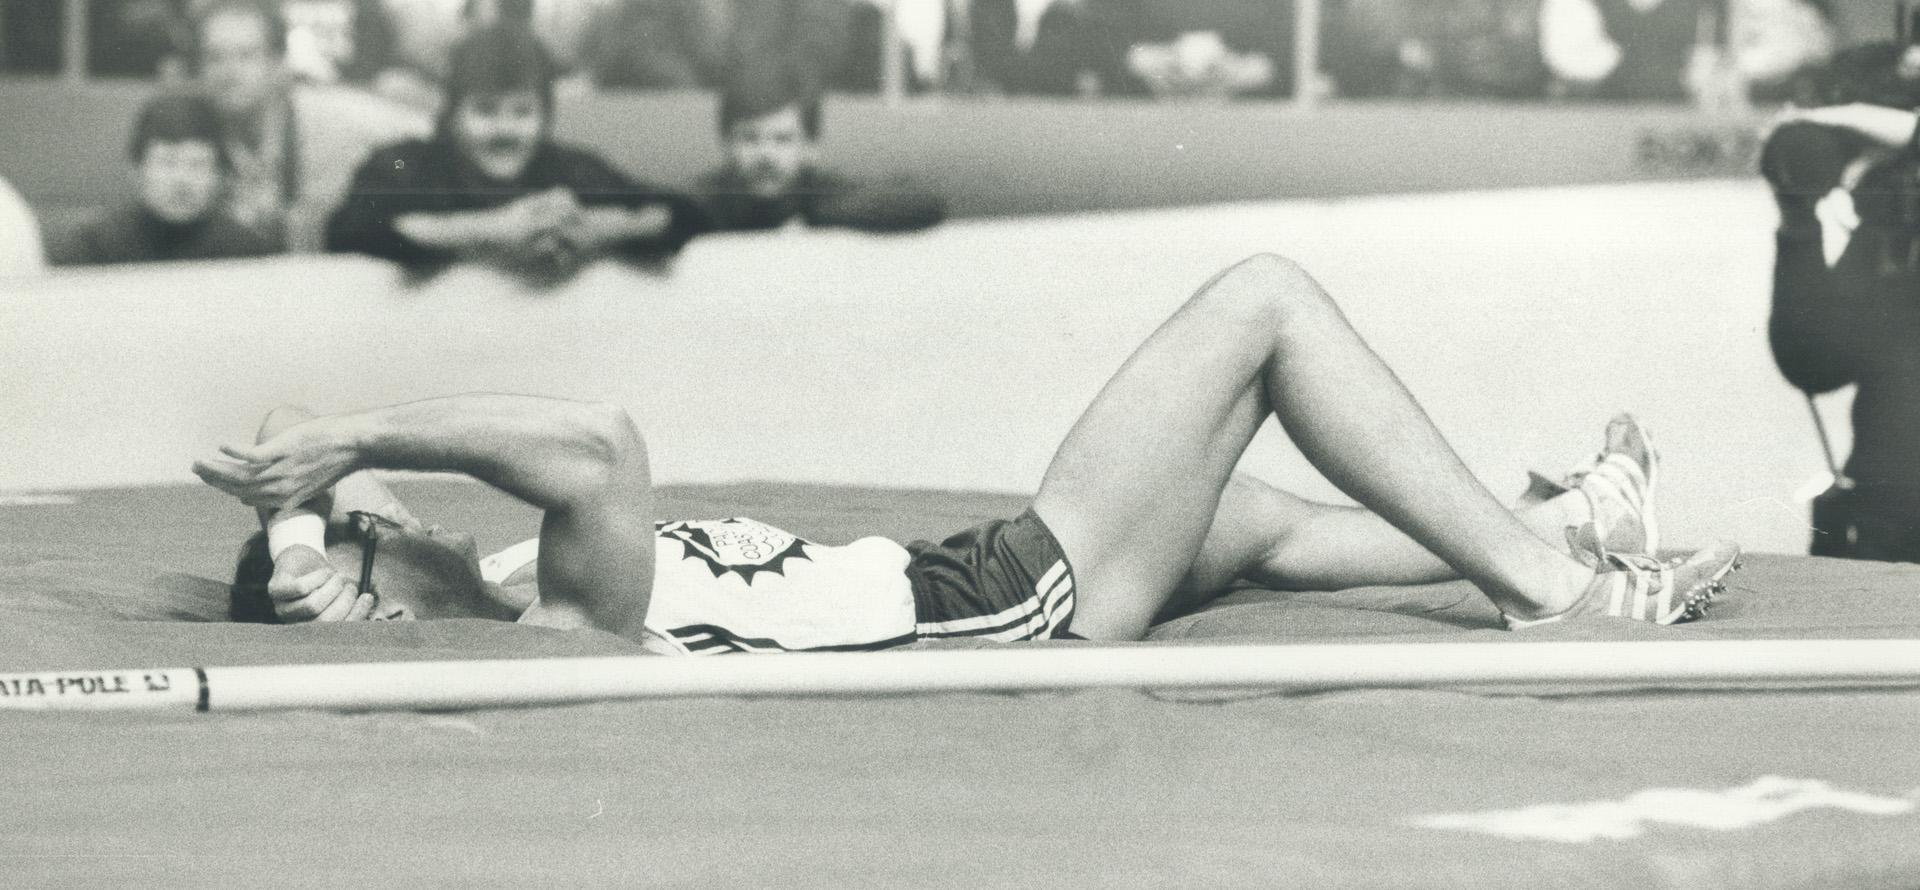 Ignominious end, Pole-vaulter Bill Olson lies on the mat after failing in his third and final attempt at 5